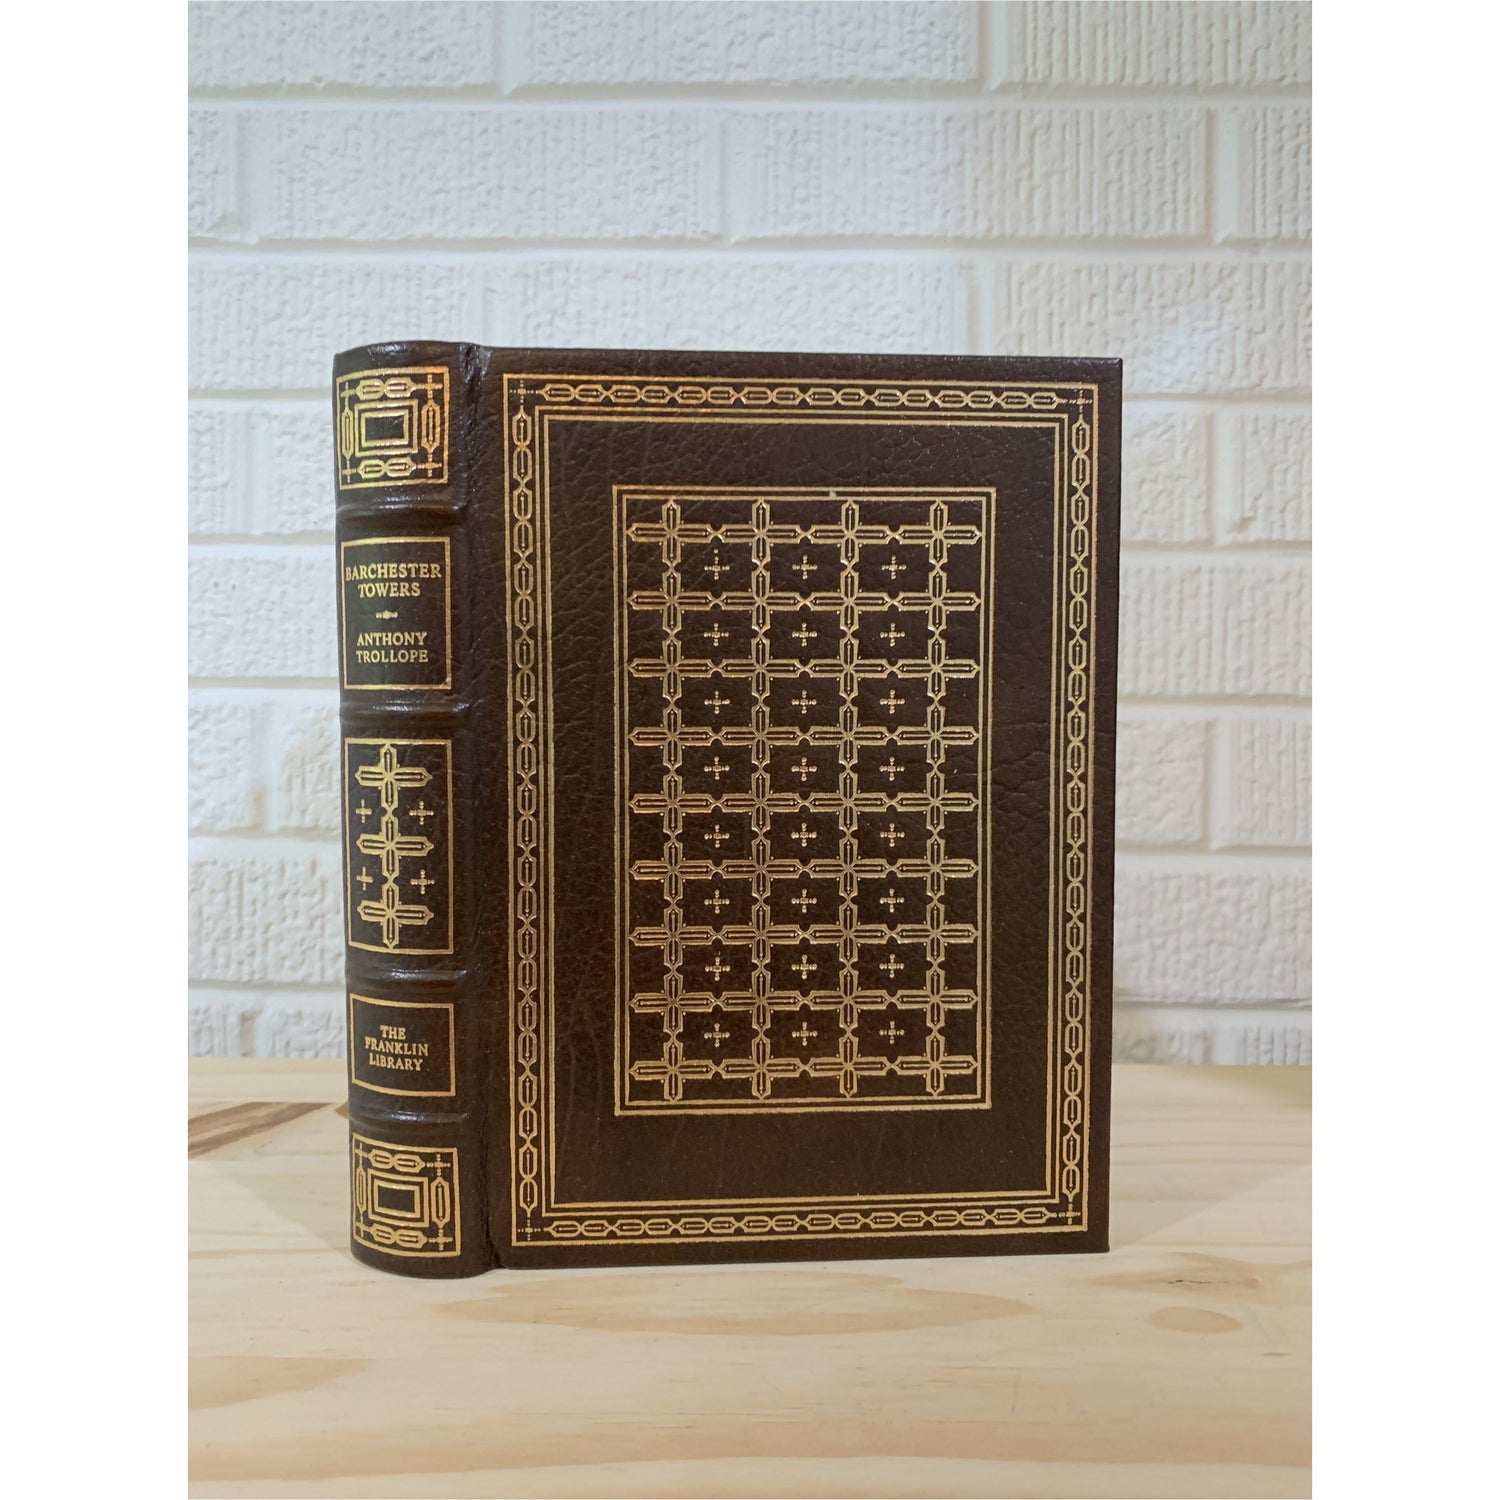 Barchester Towers, Anthony Trollope, Franklin Library, Ornate Leather Book, Limited Edition